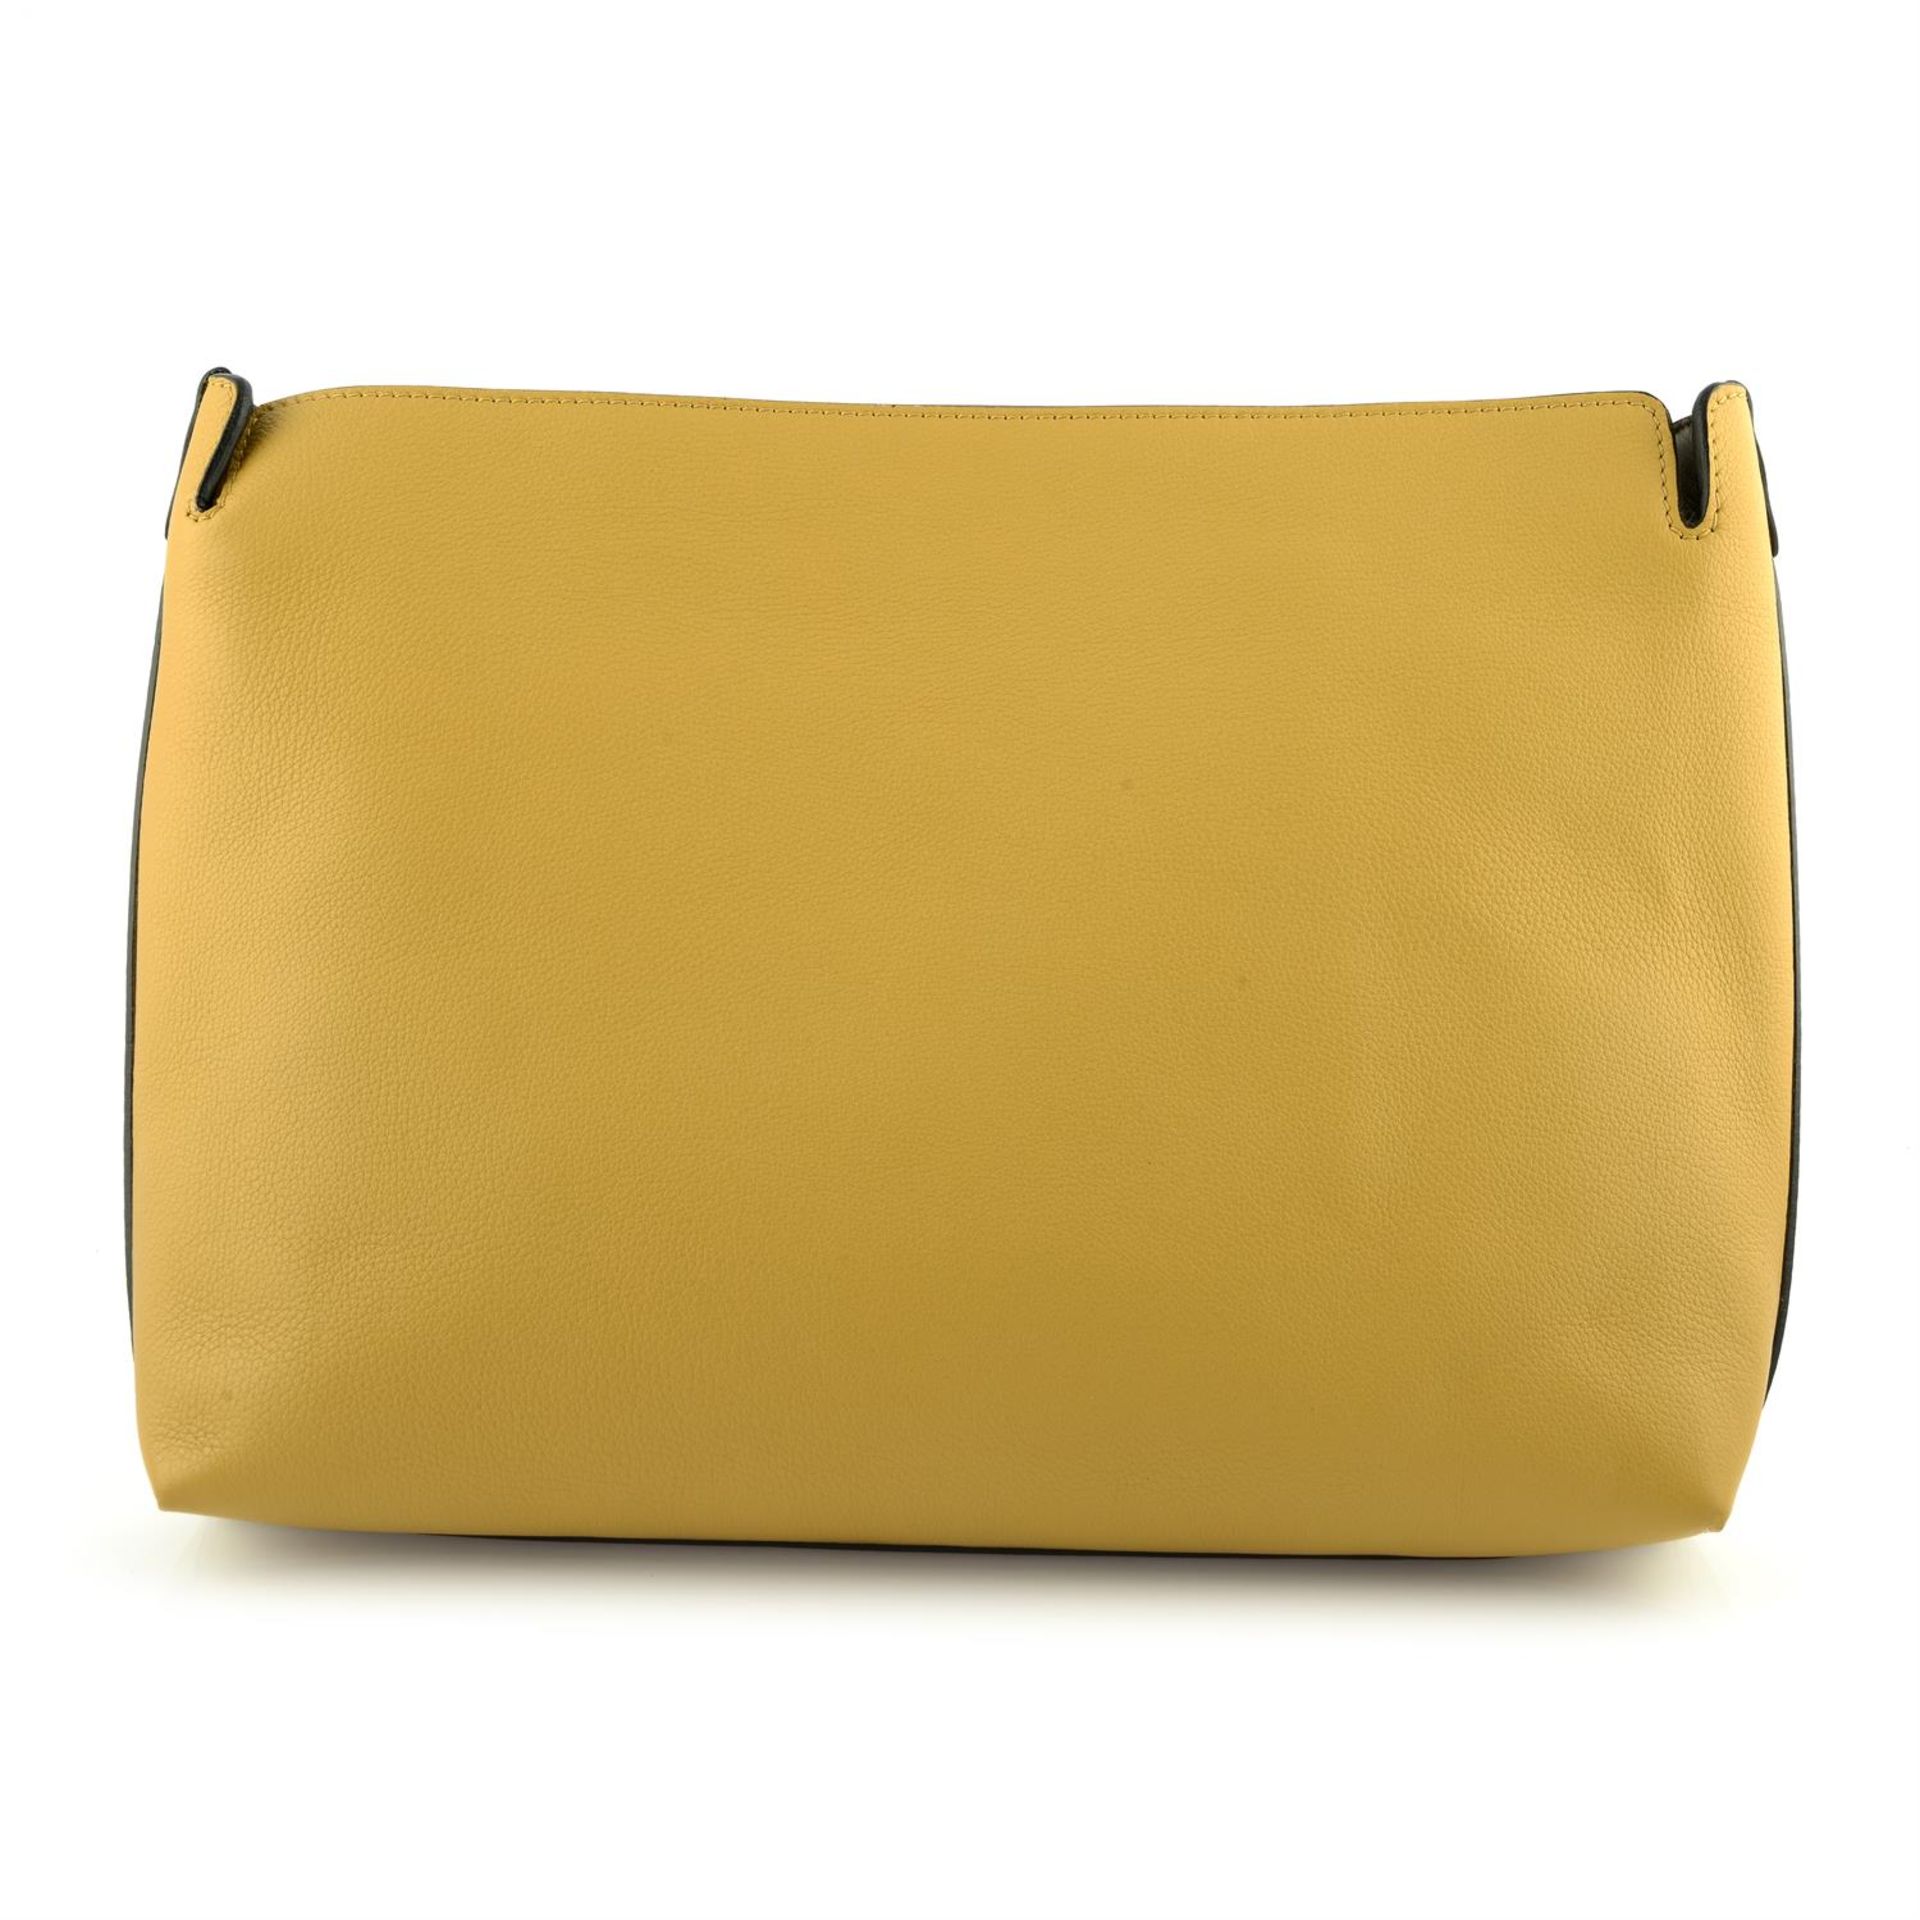 BURBERRY - a two-tone leather Marias clutch. - Image 2 of 5